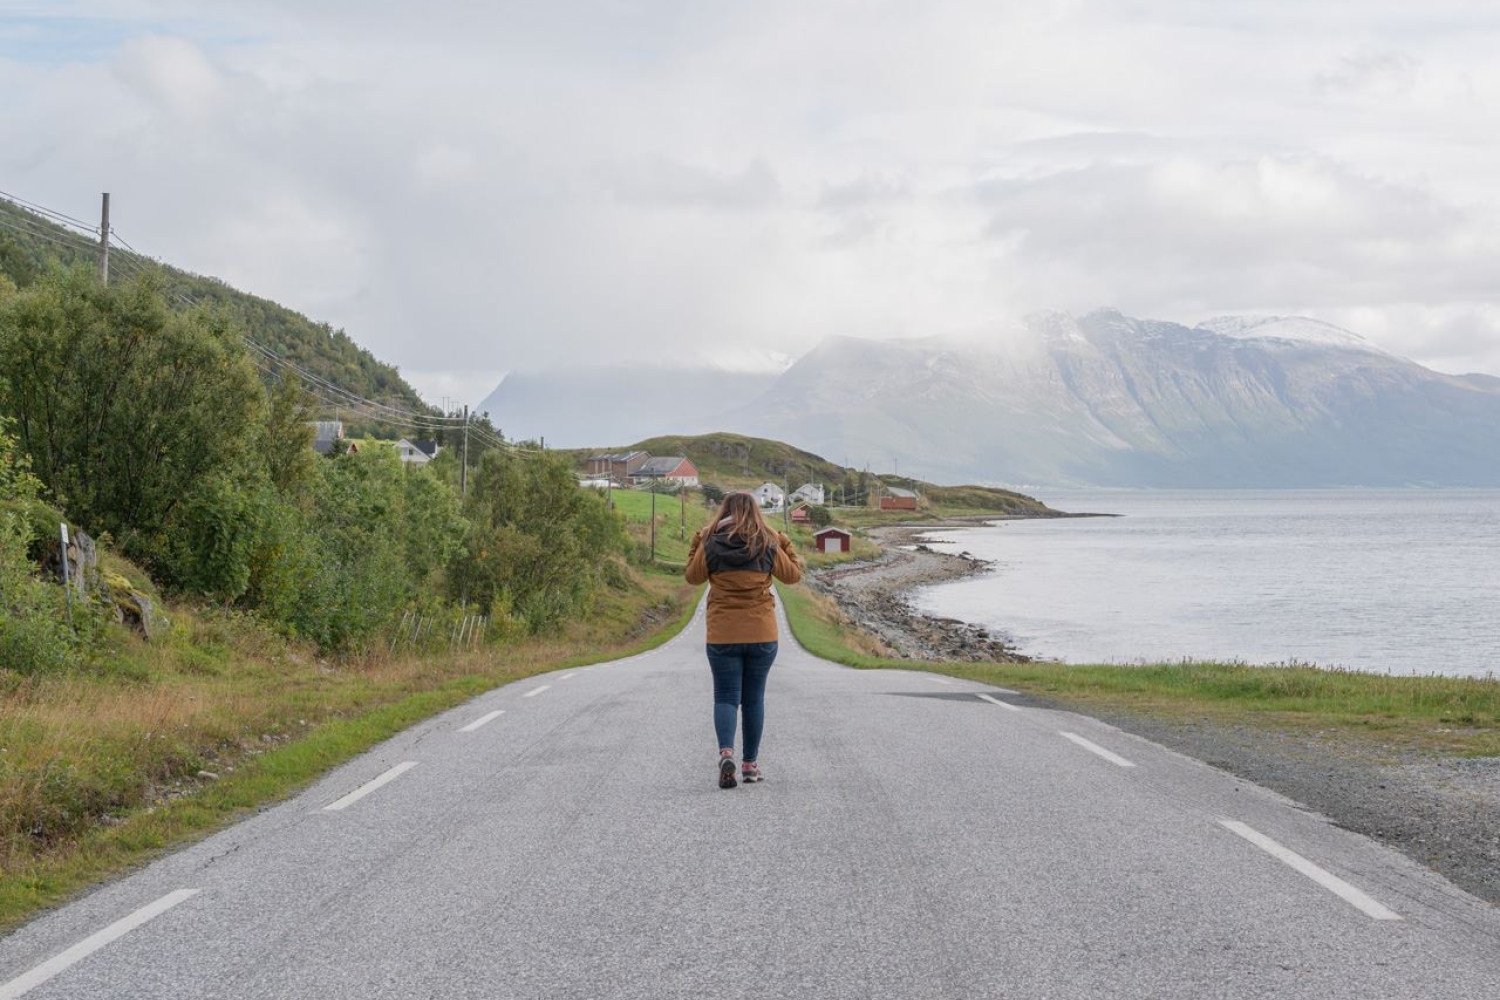 Private | Arctic Roadtrip: Sommarøy with scenic picnic Ⓥ | Sightseeing | 4x4 VW Van